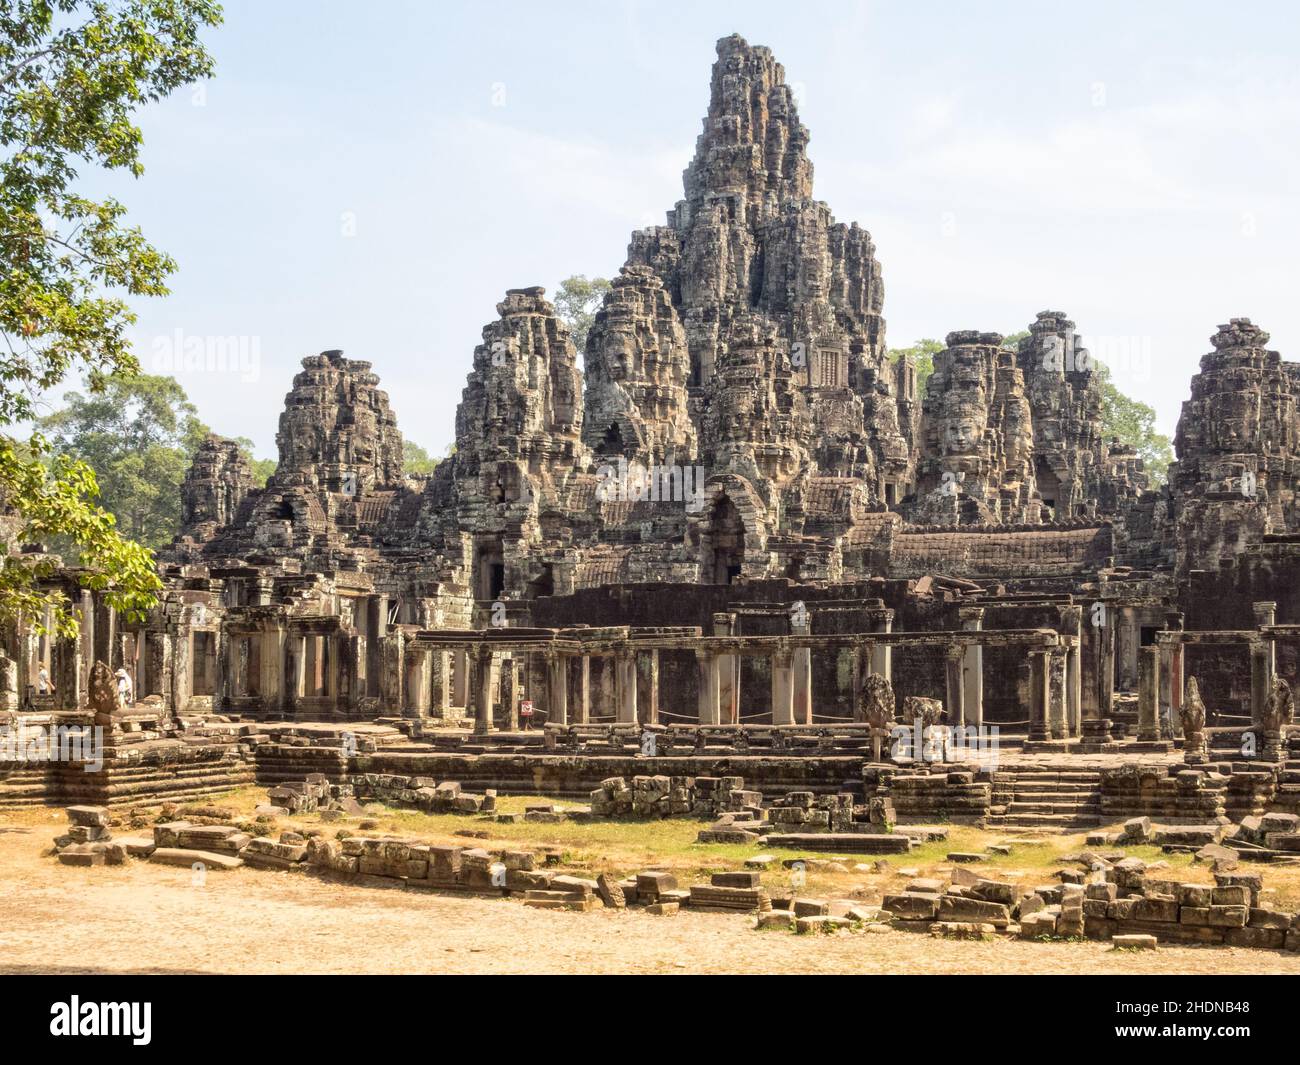 Prasat Bayon is a richly decorated Khmer temple at Angkor built in the late 12th or early 13th century - Siem Reap, Cambodia Stock Photo